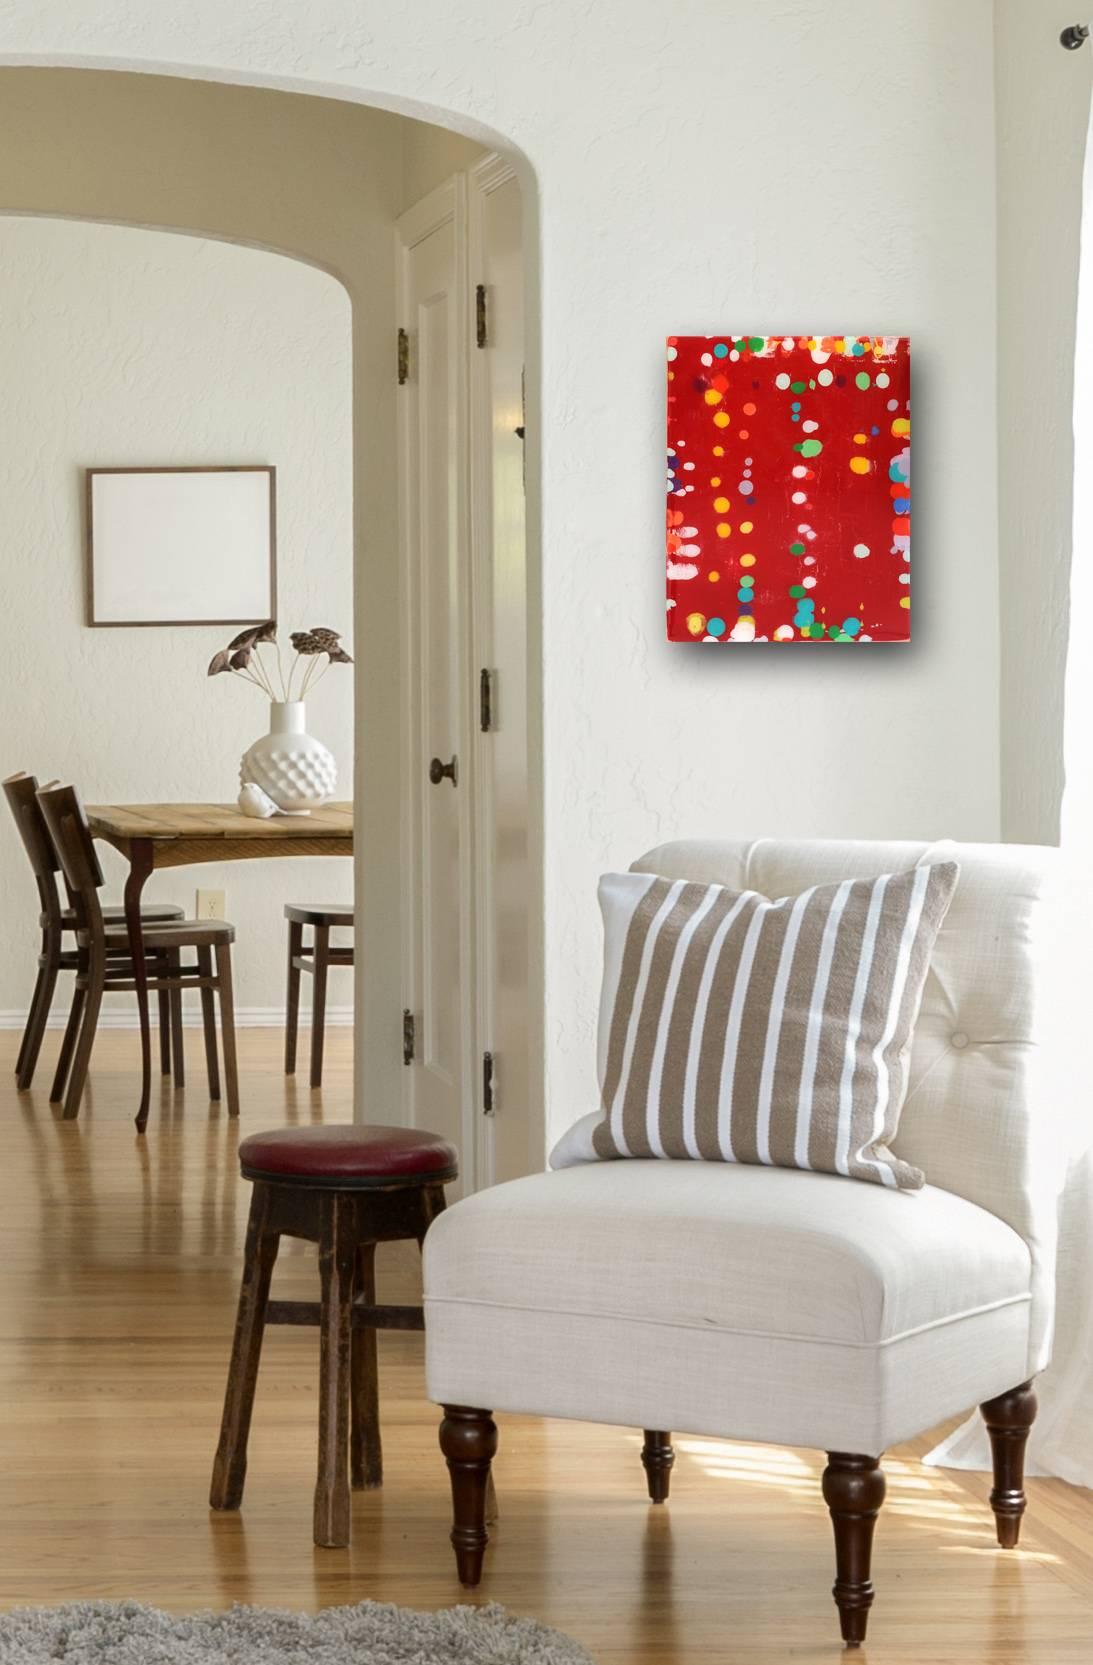 This colorful red 20 by 16 inch original mixed-media artwork by Los Angeles artist Ron Piller assumes physical characteristics of both architecture and sculpture. The surface is covered with a smooth layer of clear, glass-like resin, which enhances